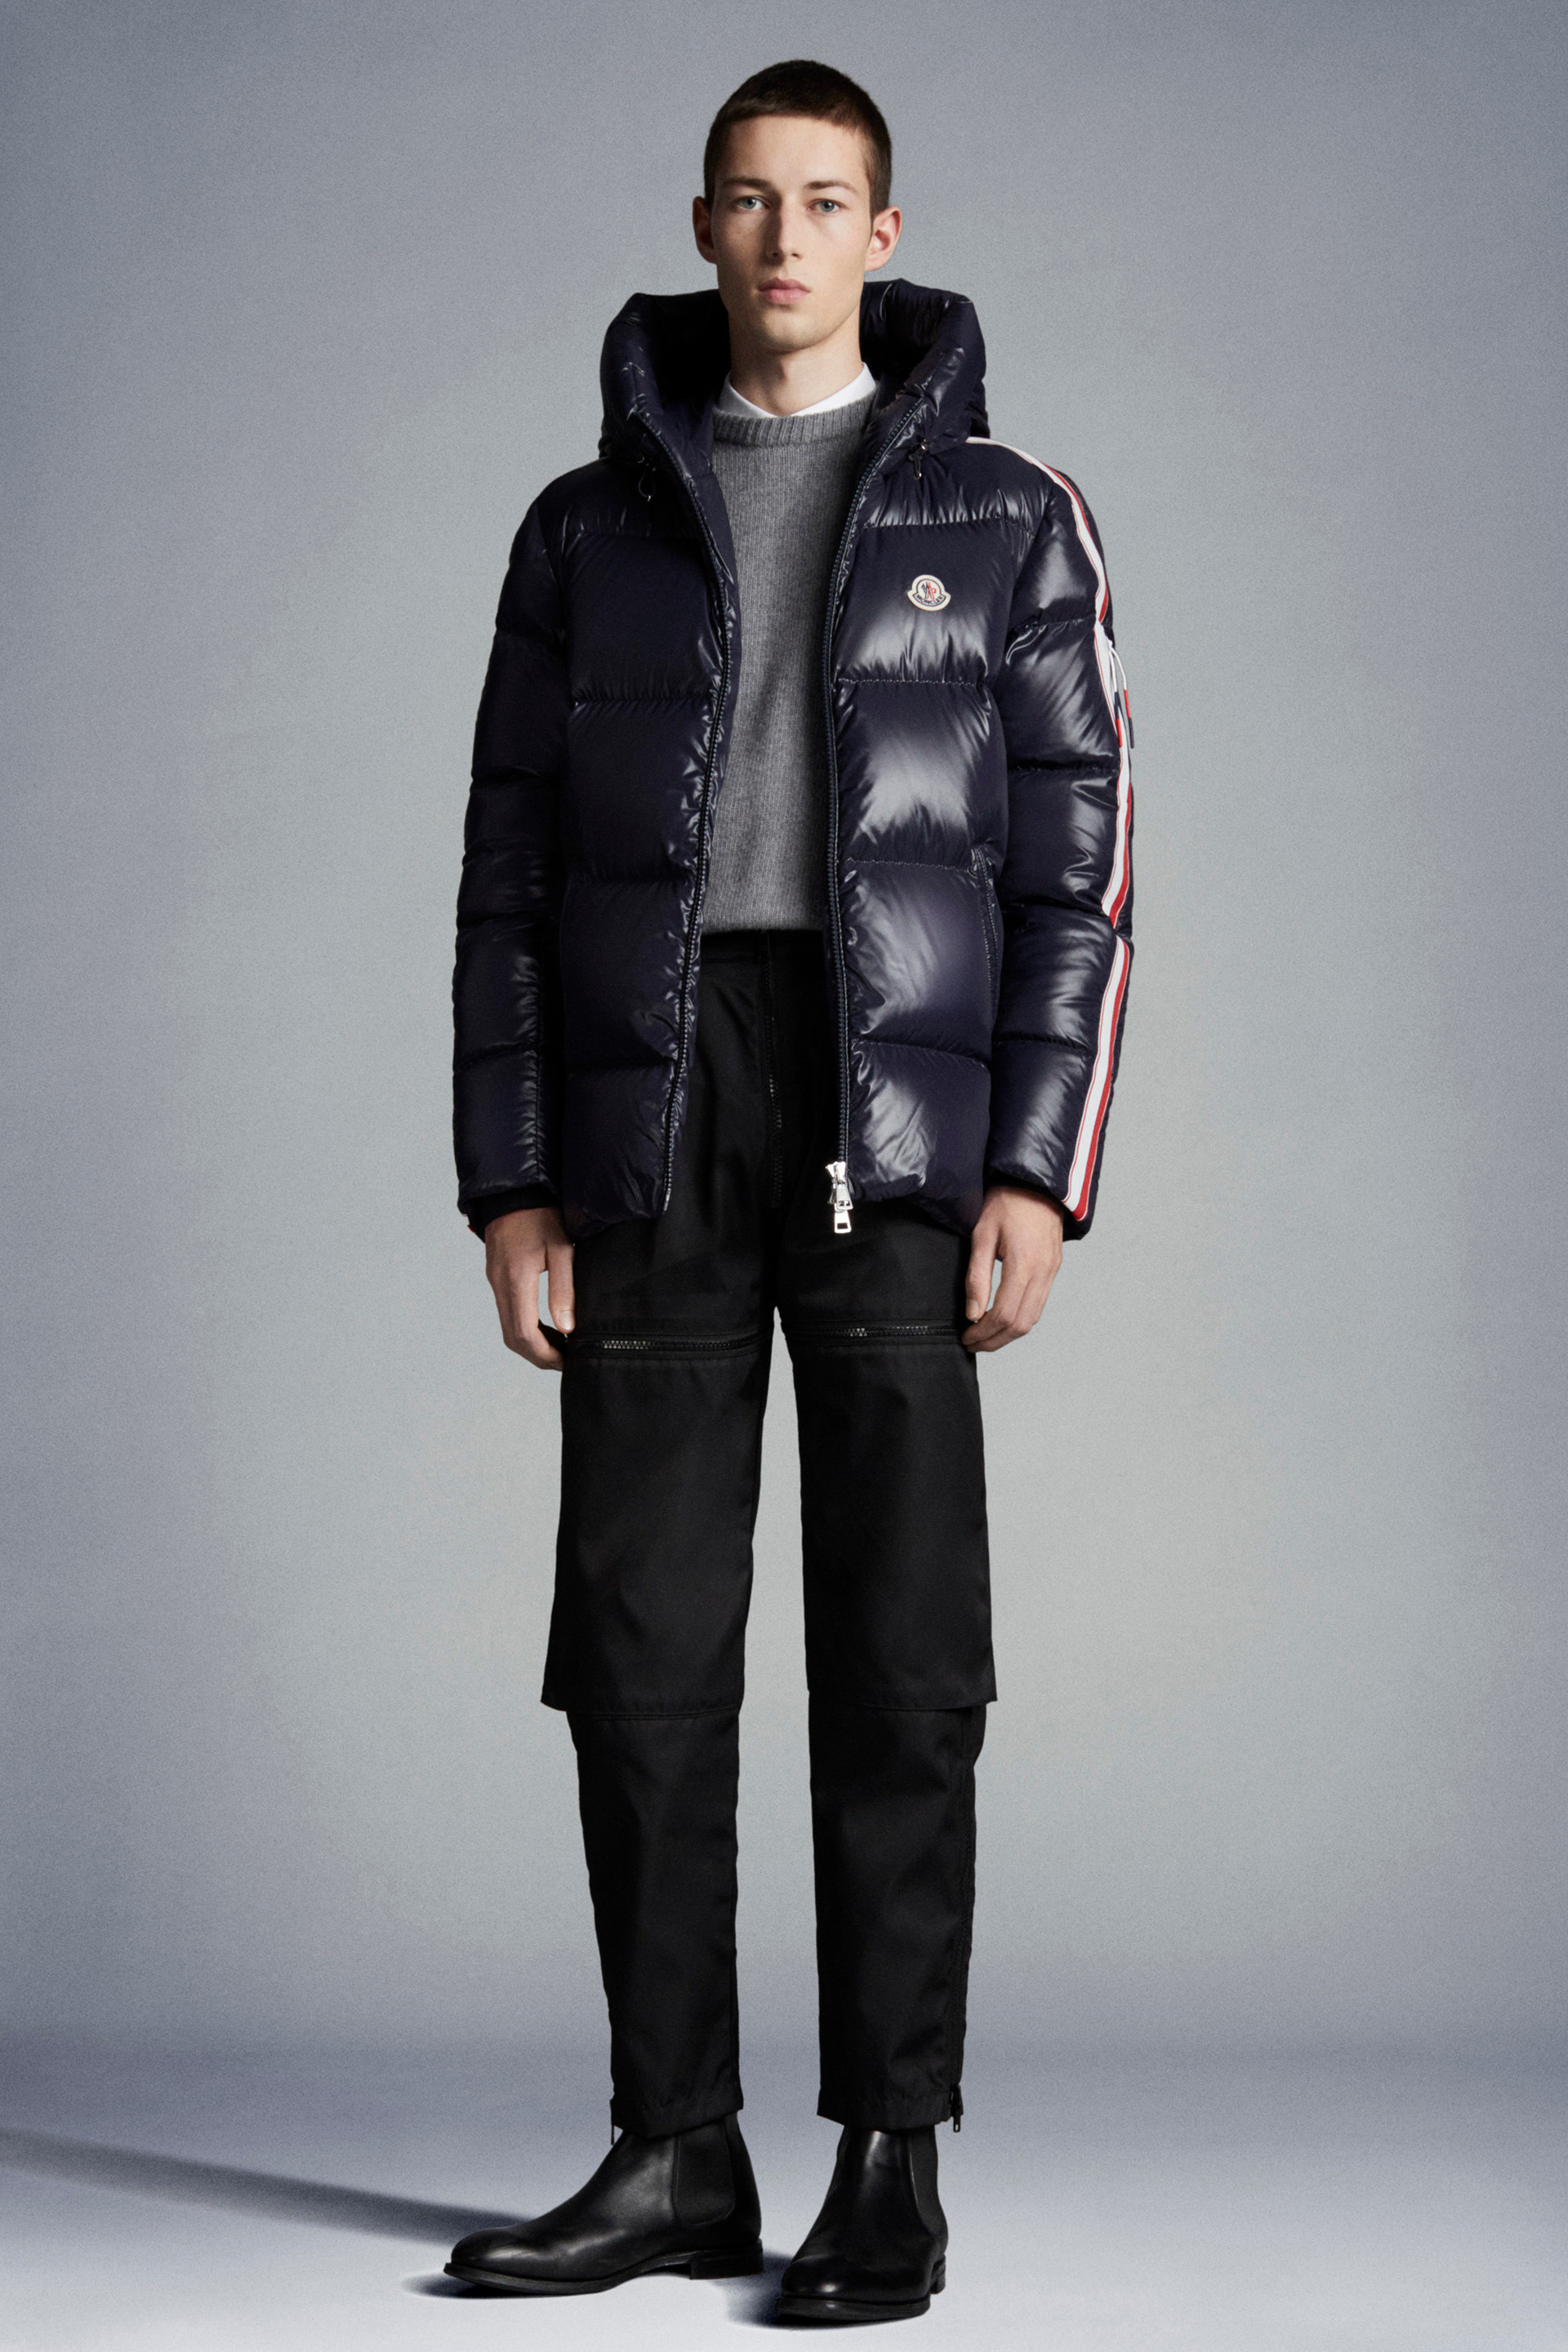 moncler jacket down,OFF 63%,www.concordehotels.com.tr